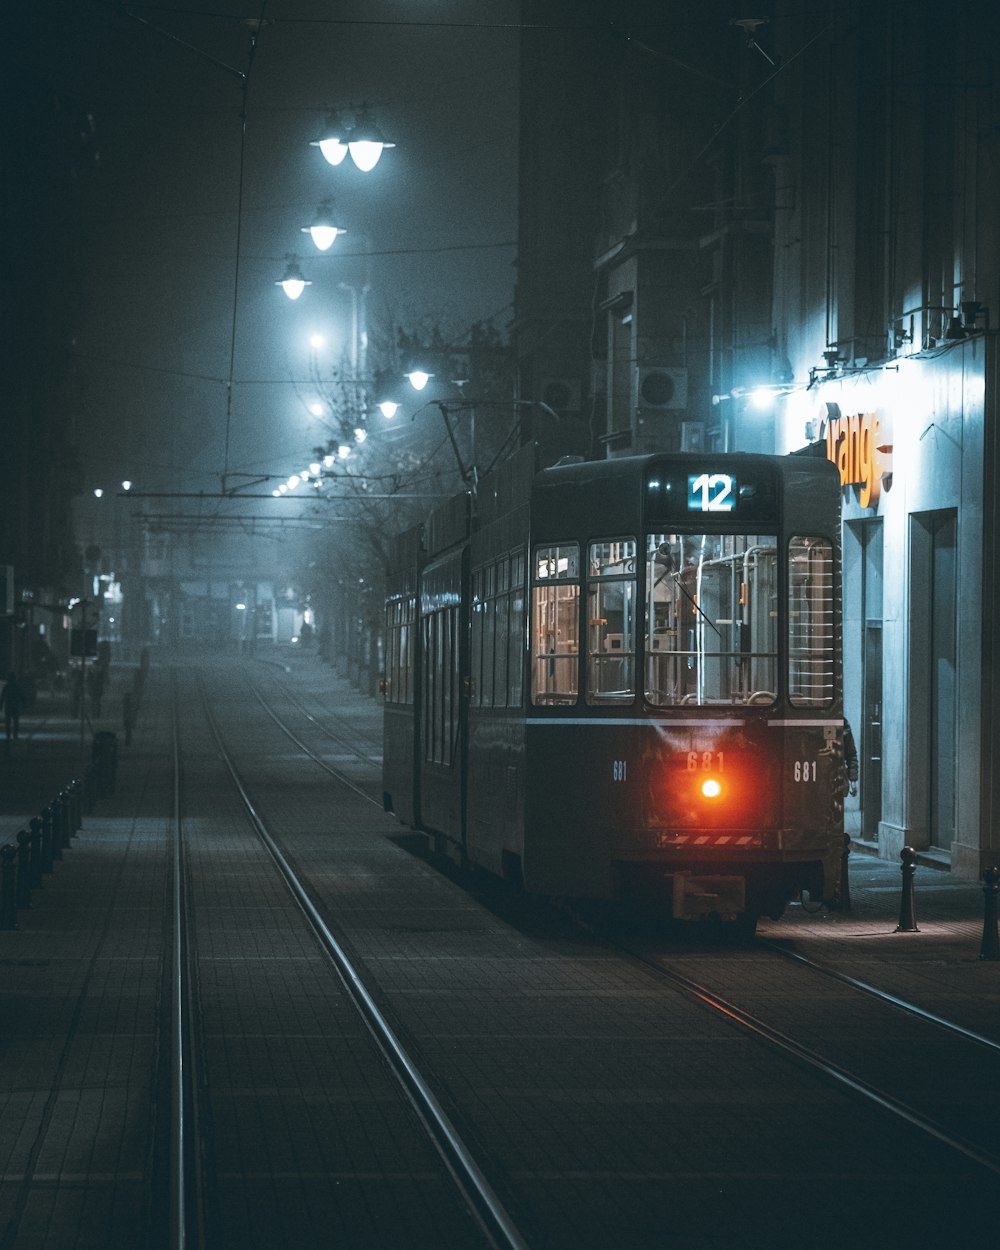 a trolley on a city street at night